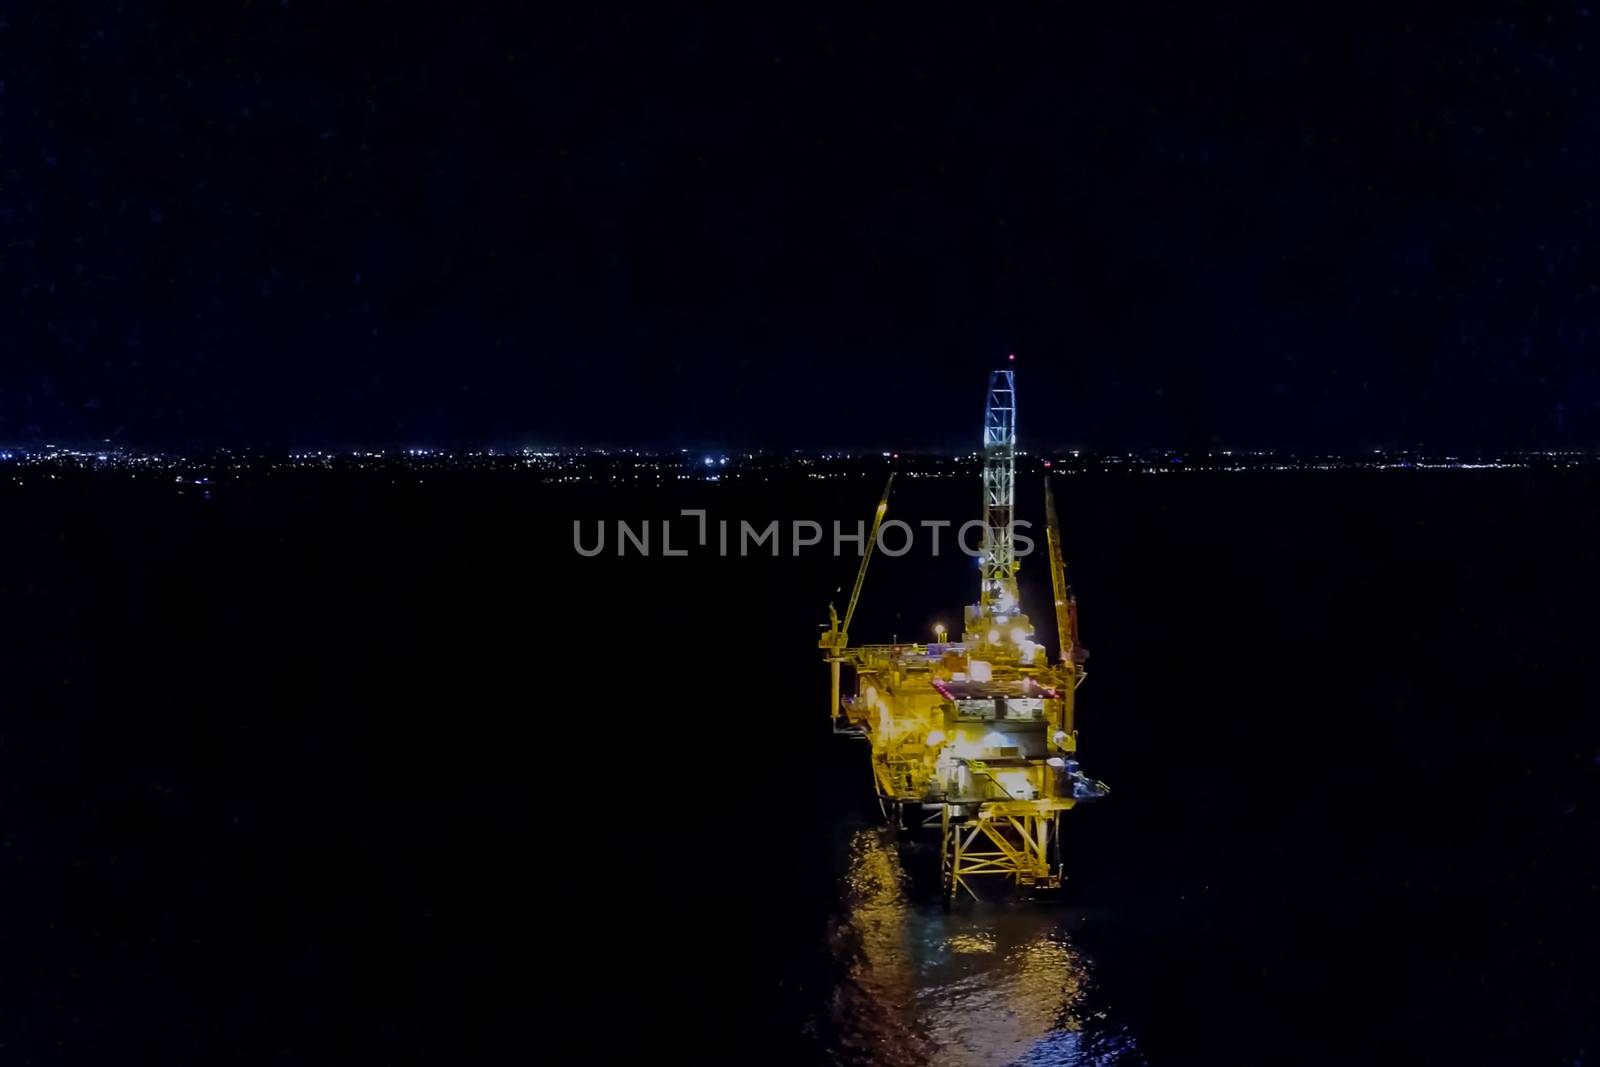 Oil platform at night in the light of its own lighting. Towing o by nyrok